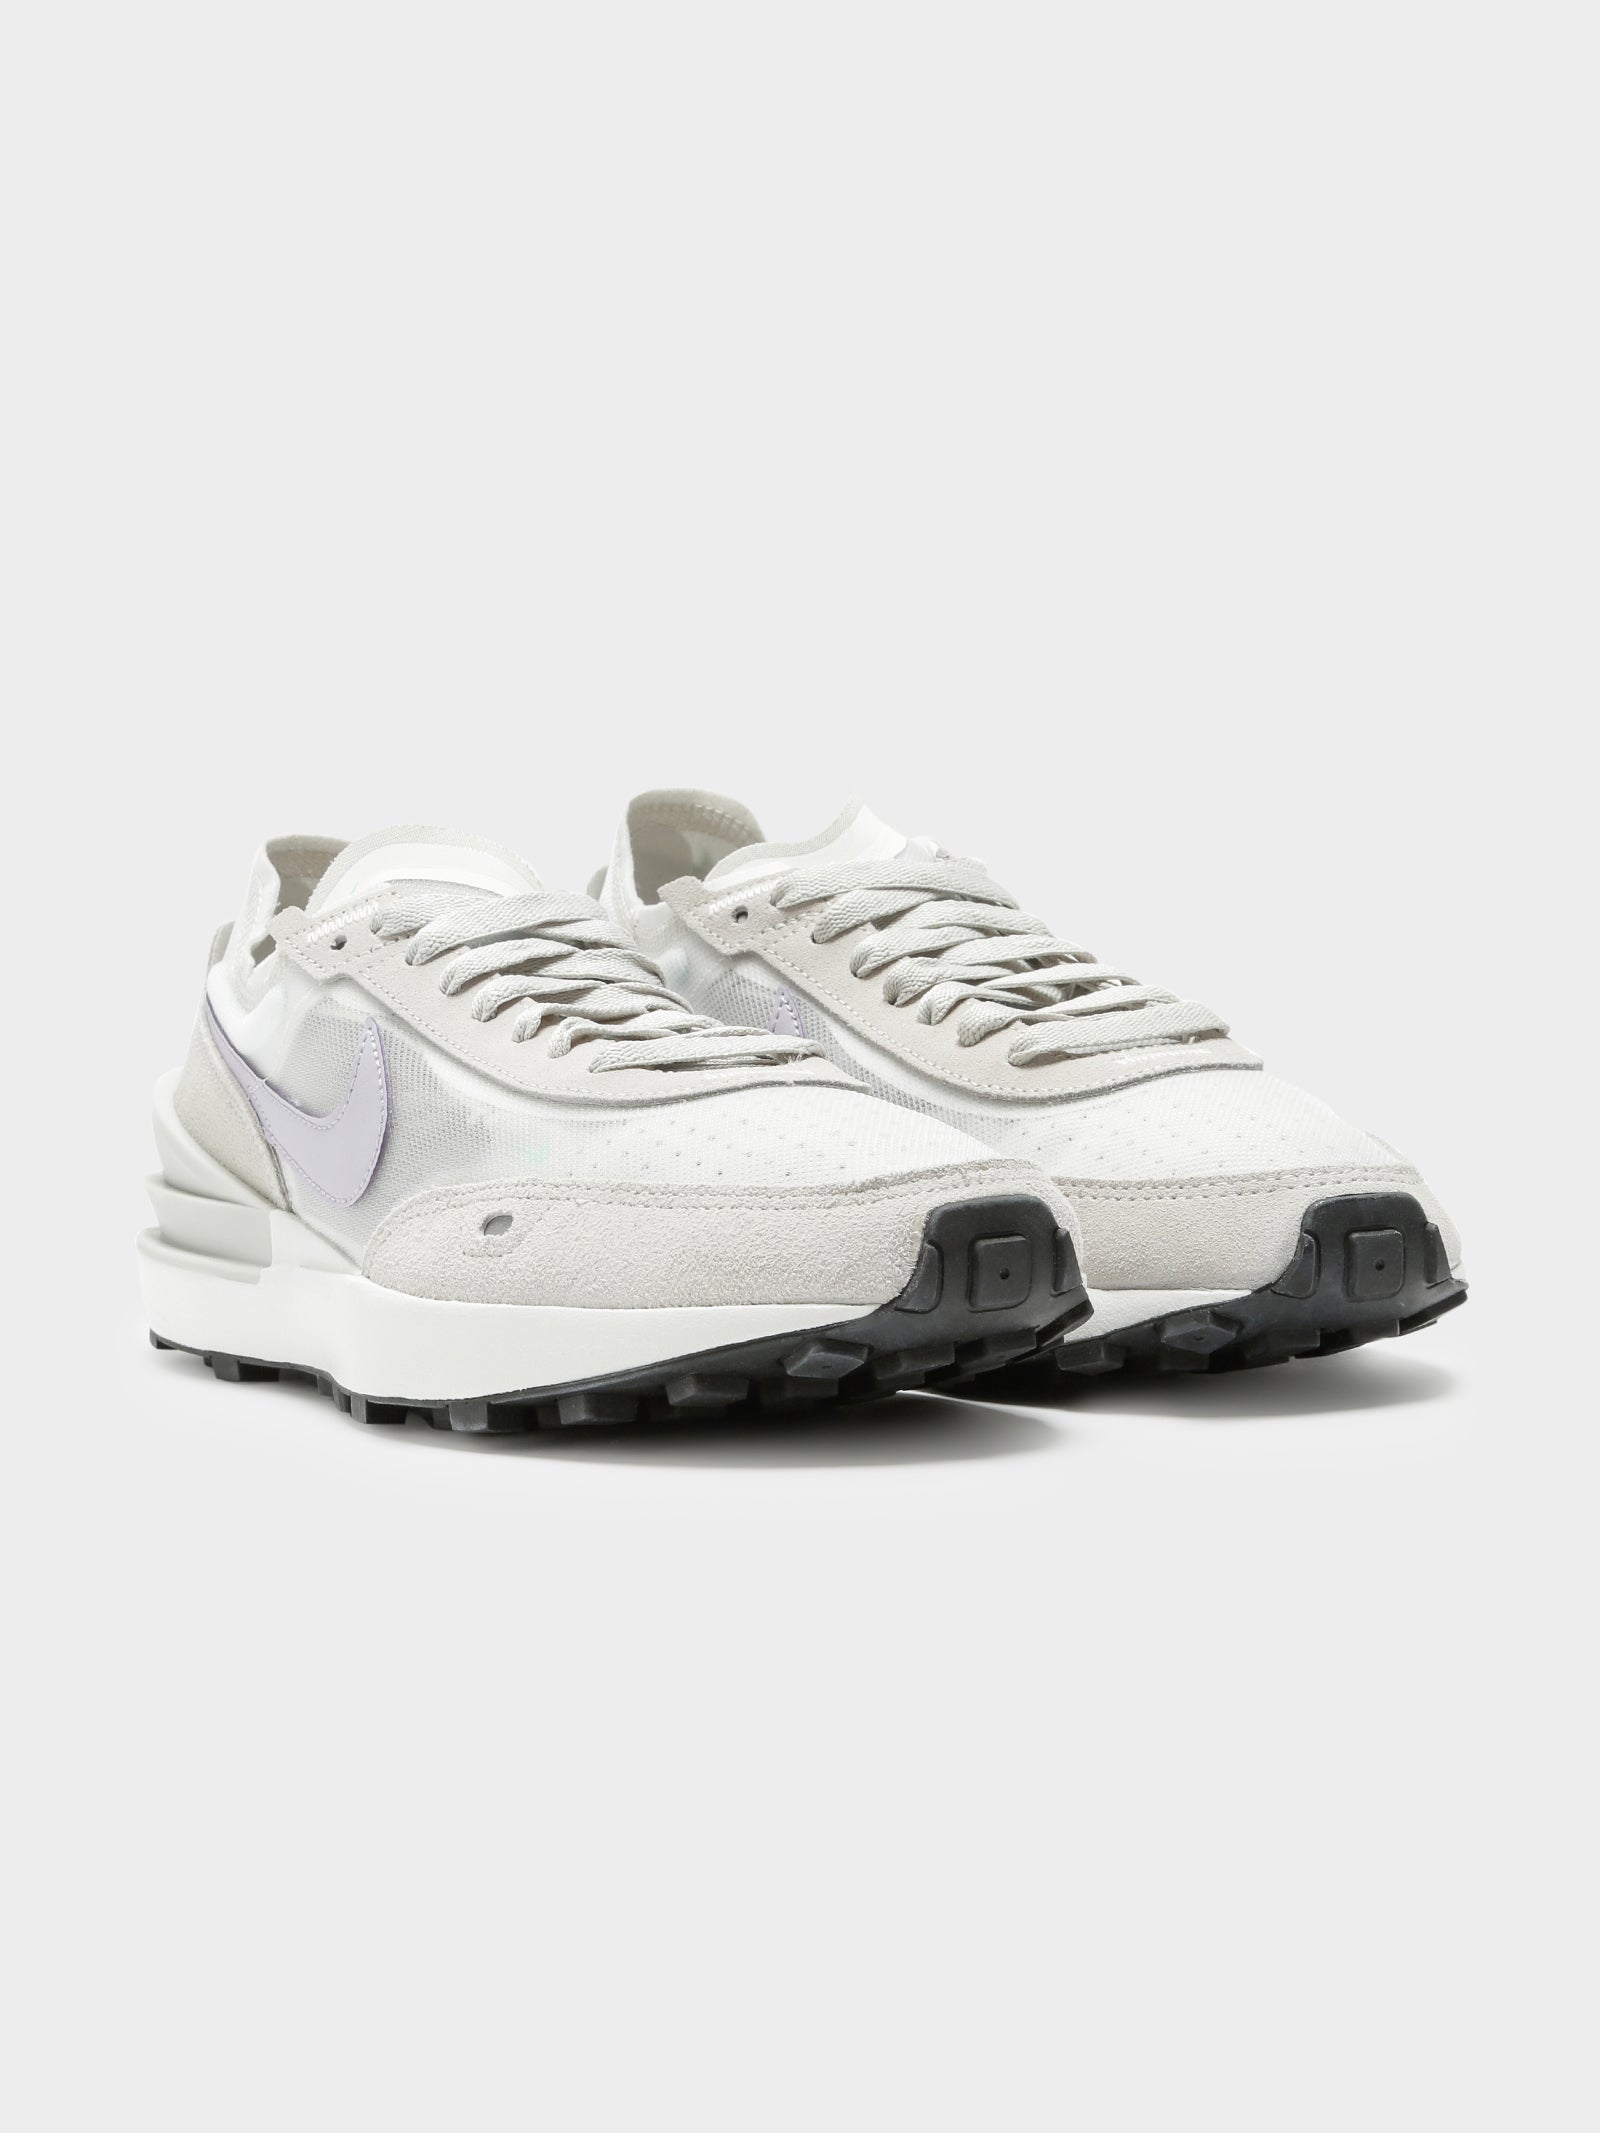 Womens Waffle One Sneakers in Summit White & Infinite Lilac